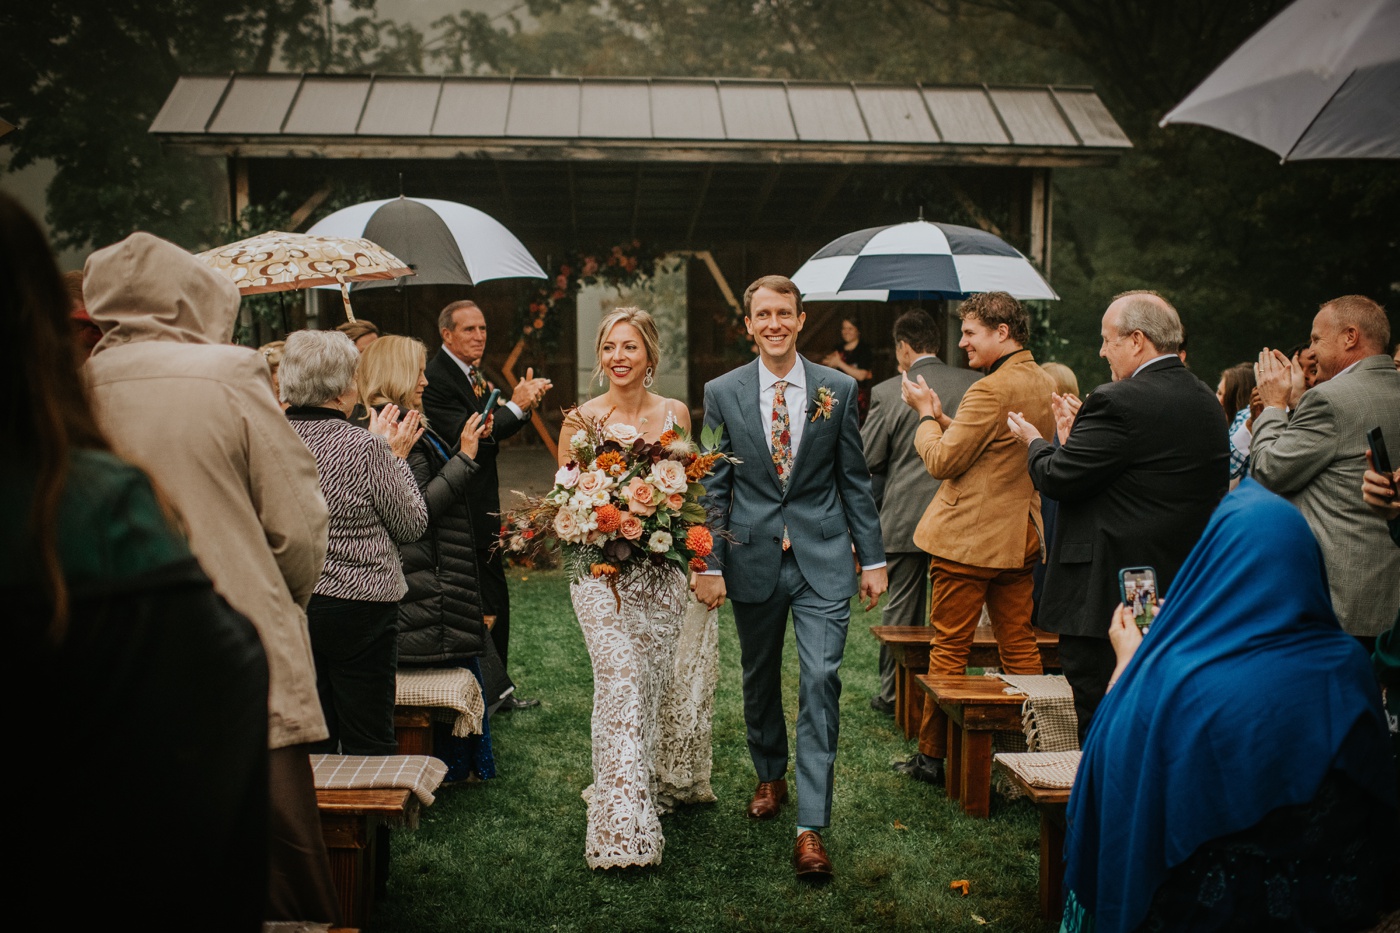 Fall outdoor wedding ceremony at Toad Hill Farm